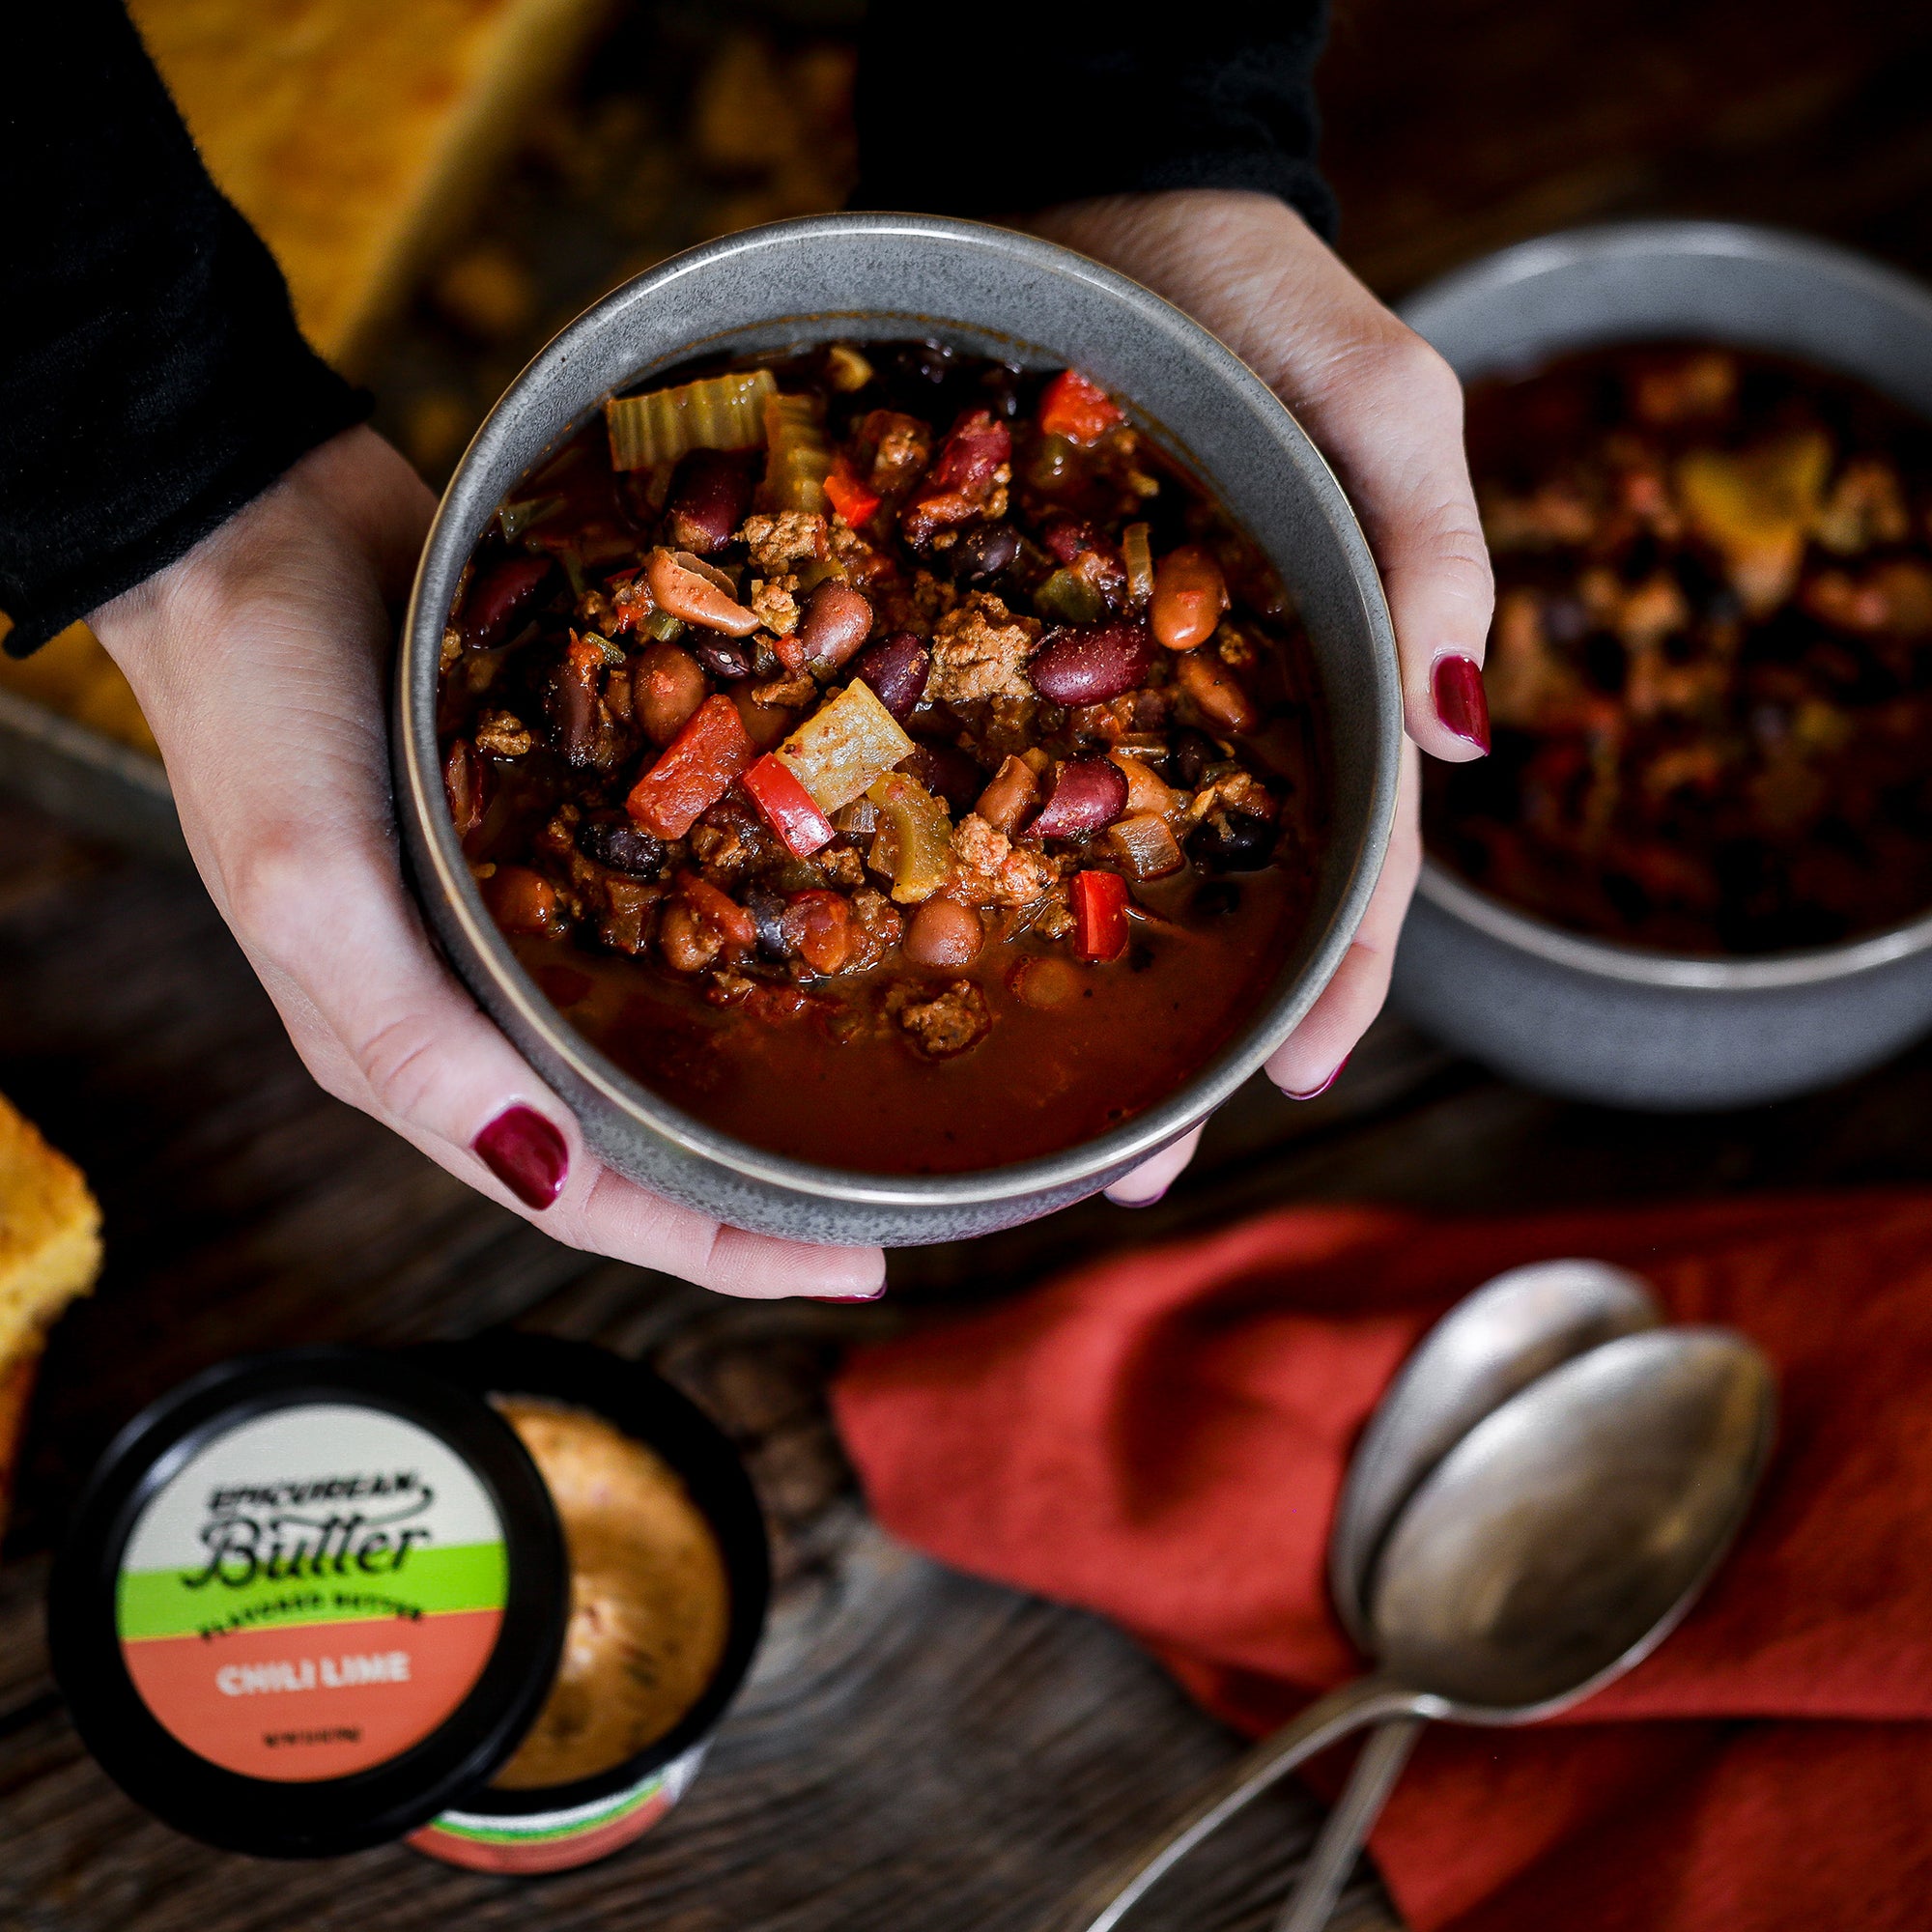 Three Bean Chili made with Epicurean Butter Chili Lime Flavored Butter